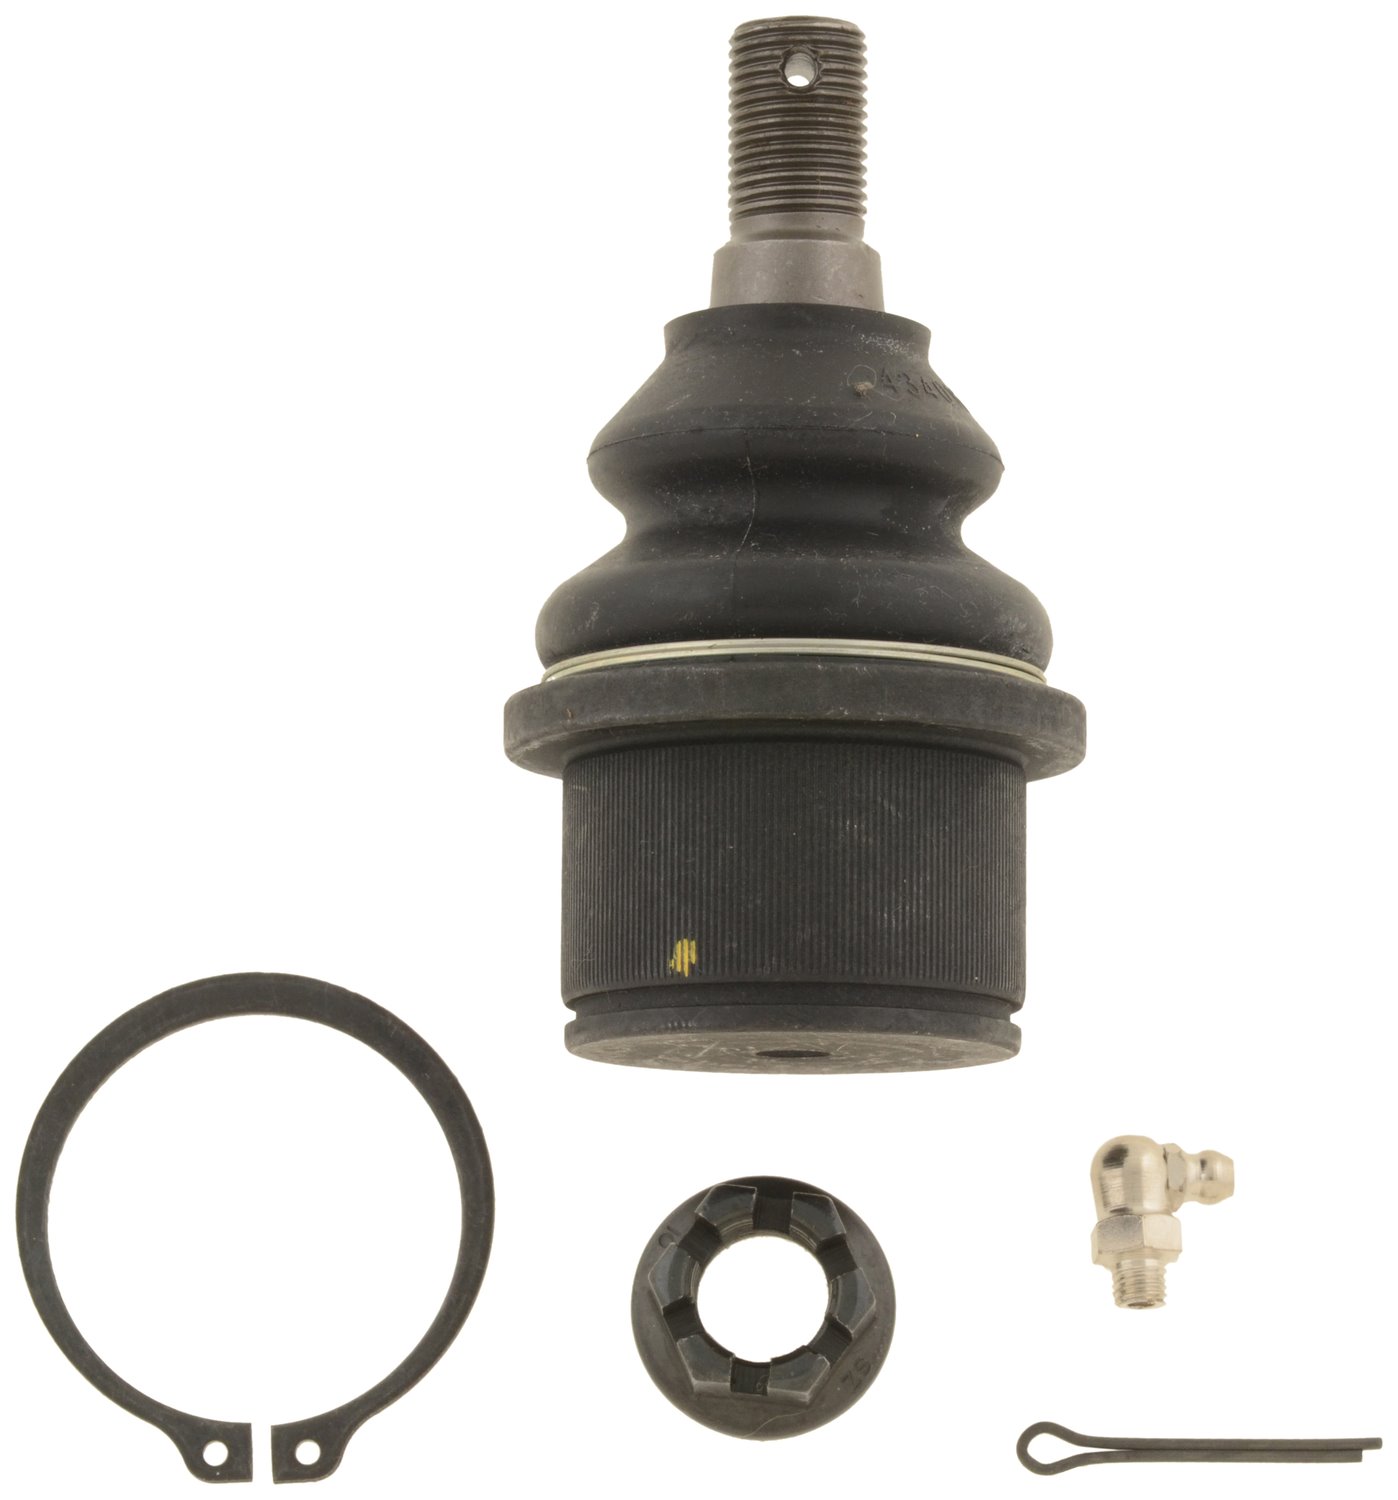 JBJ924 Ball Joint Fits Select GM Models, Position: Left/Driver or Right/Passenger, Front Lower